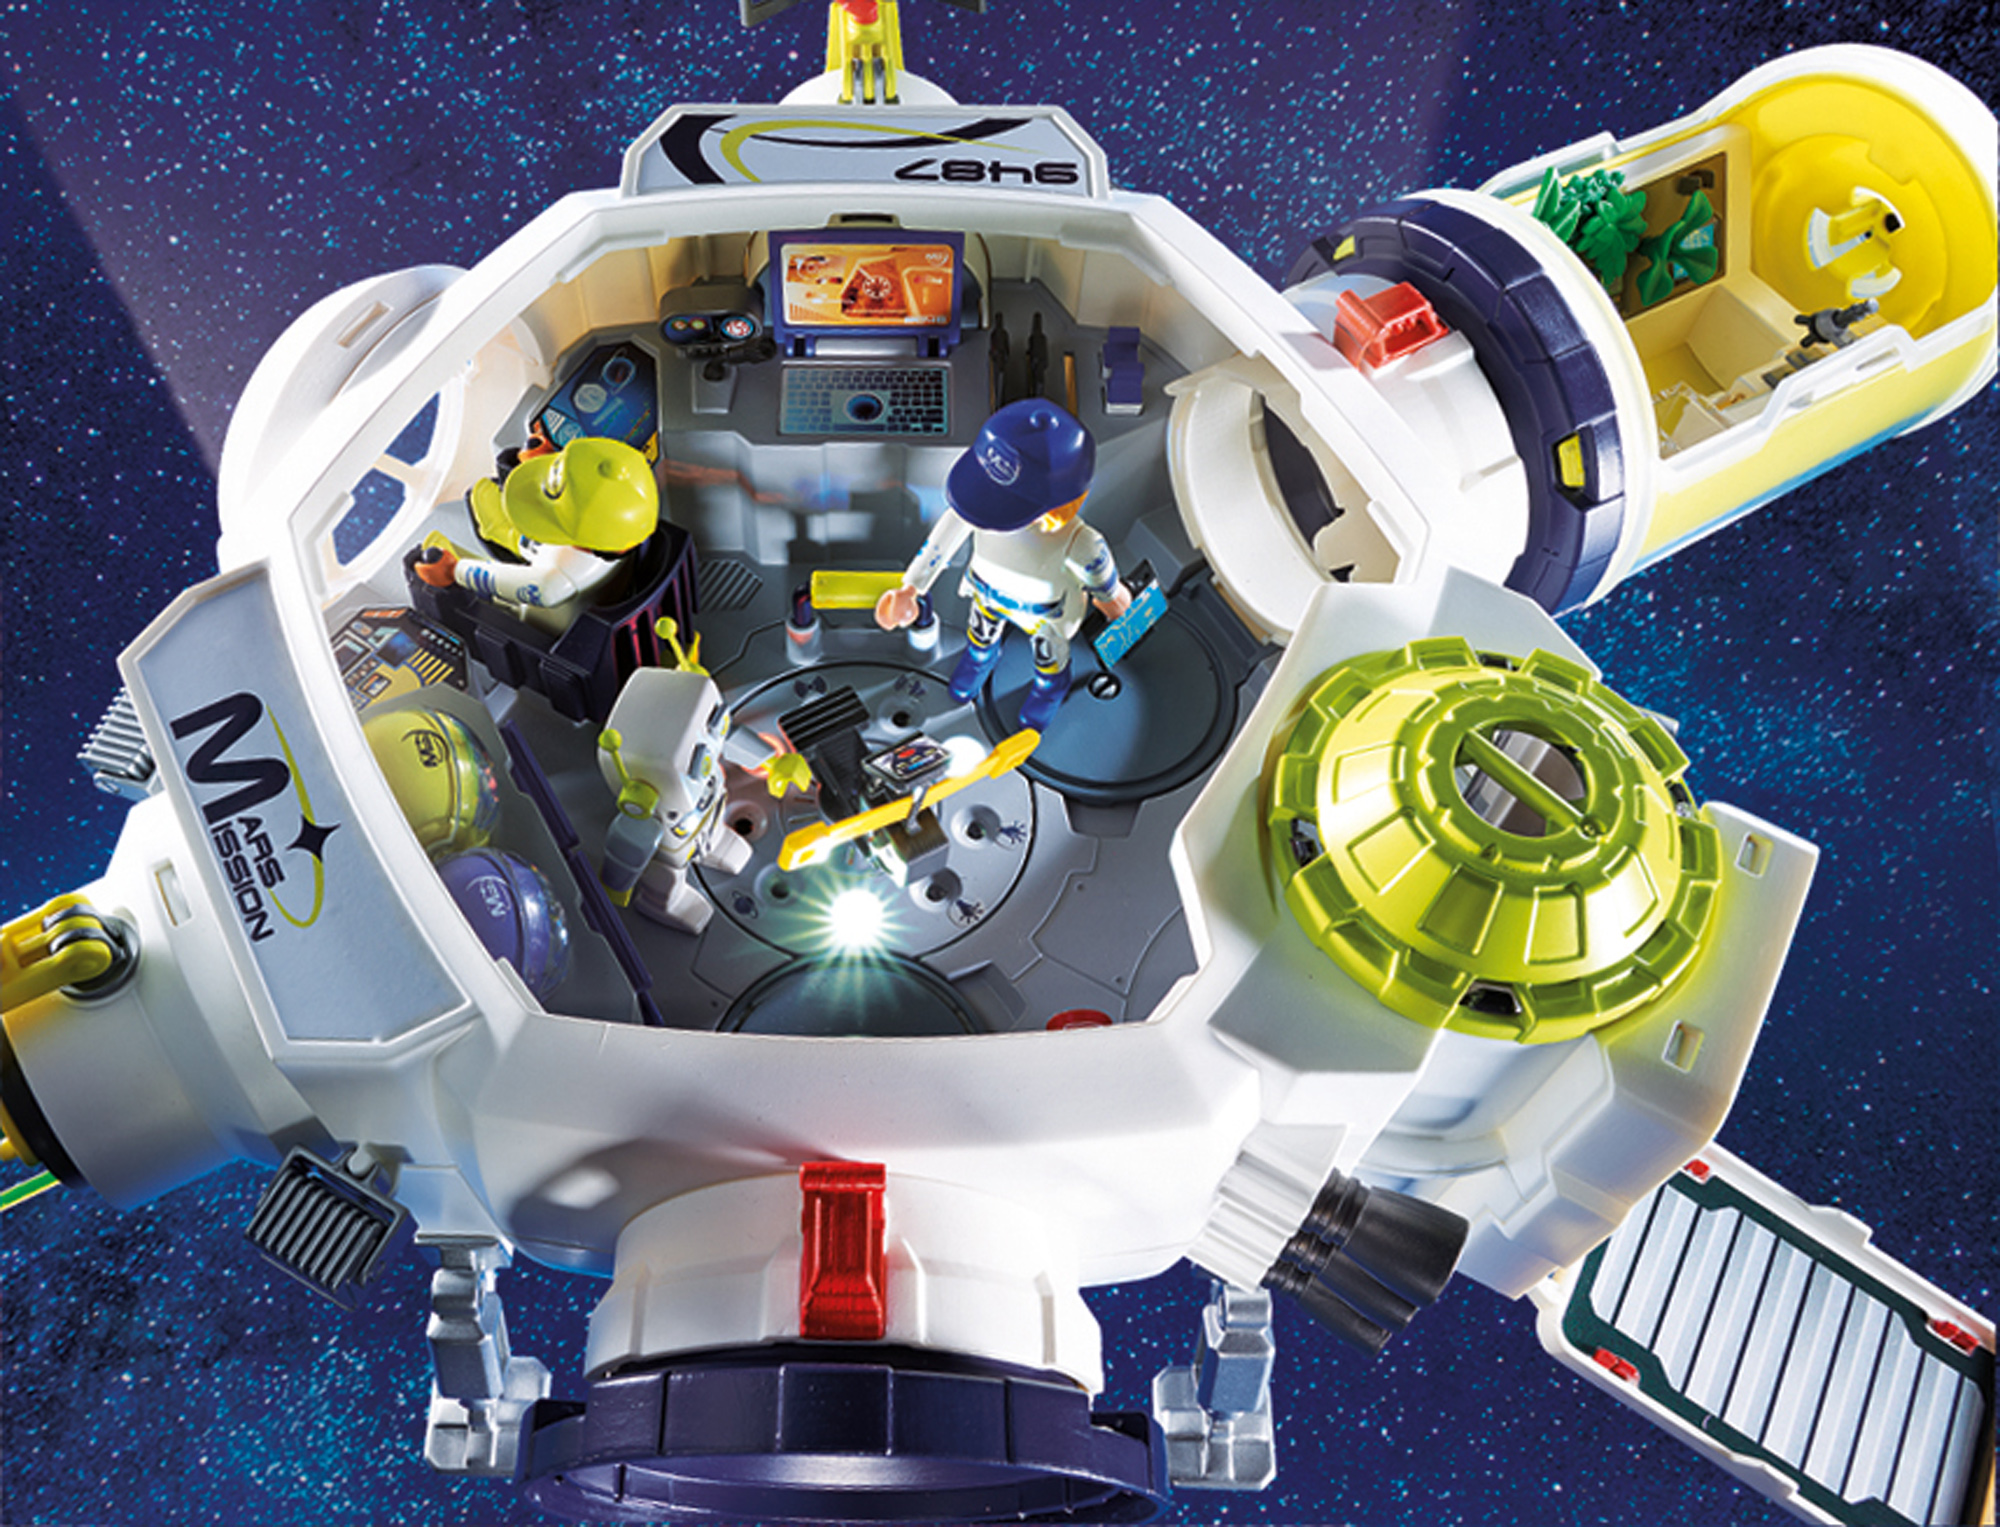 PLAYMOBIL Mars Space Station - image 7 of 9